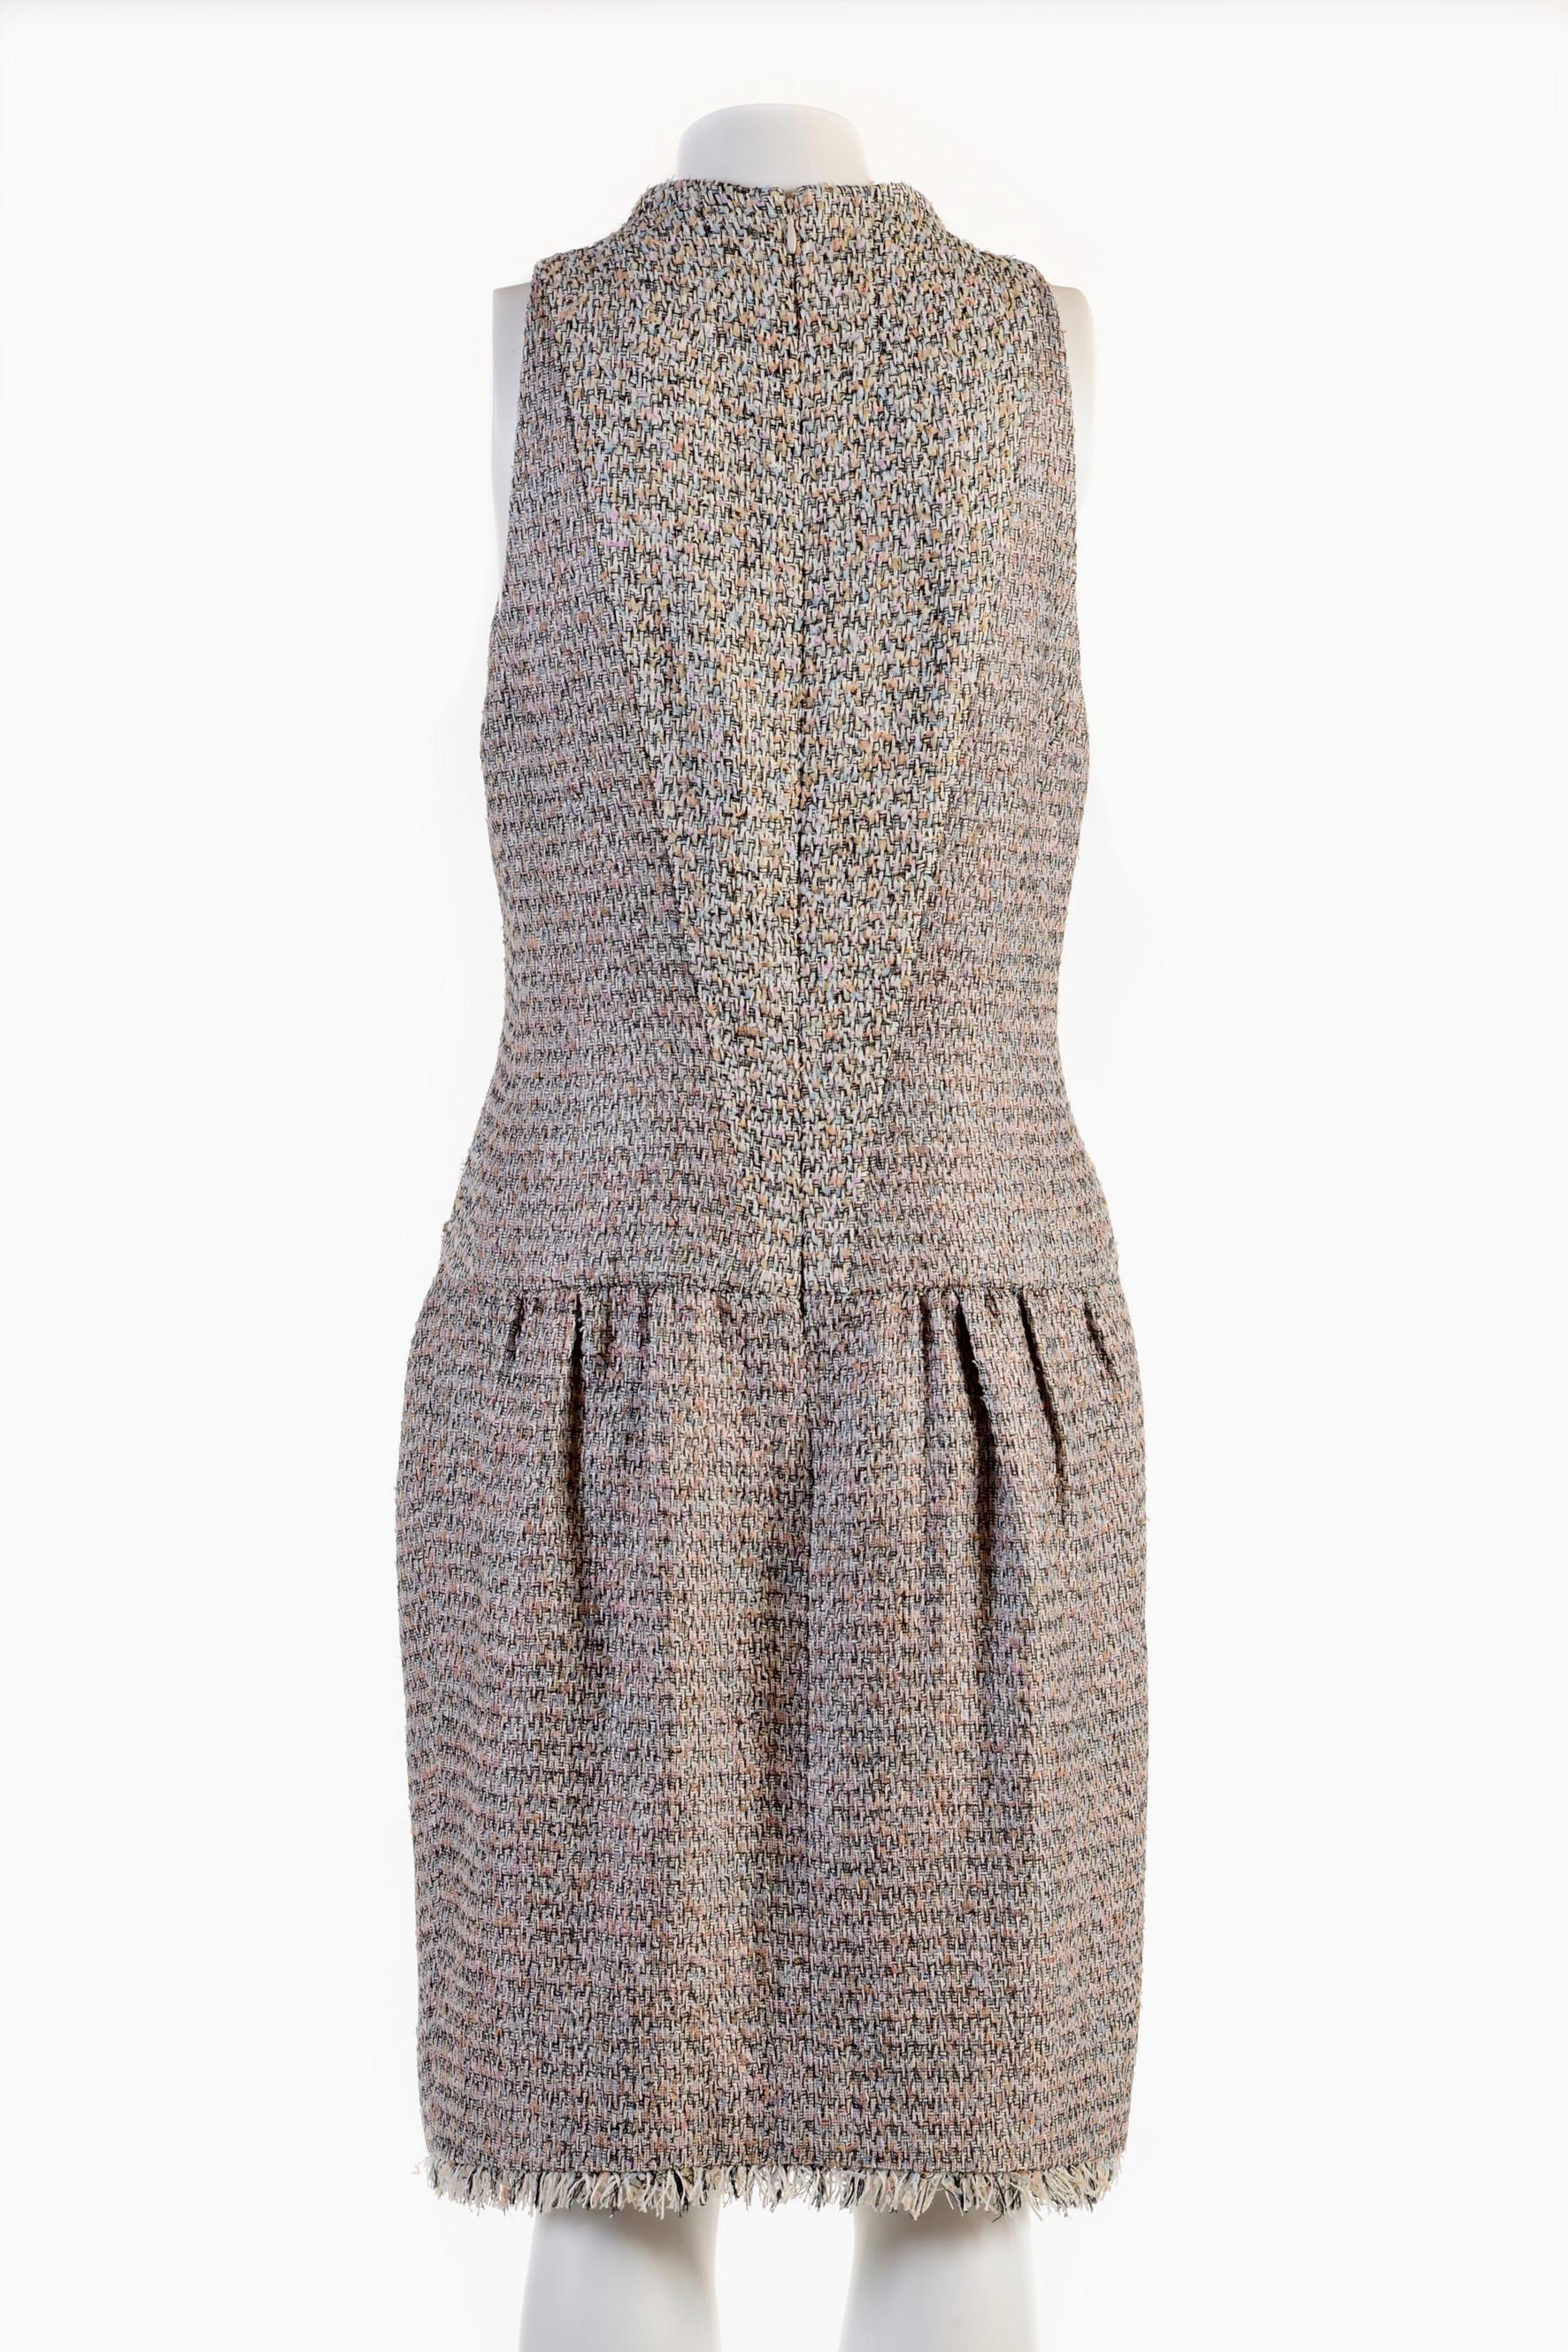 Chanel  cotton tweed dress with camelia FR 40 Spring 2011 11P For Sale 1